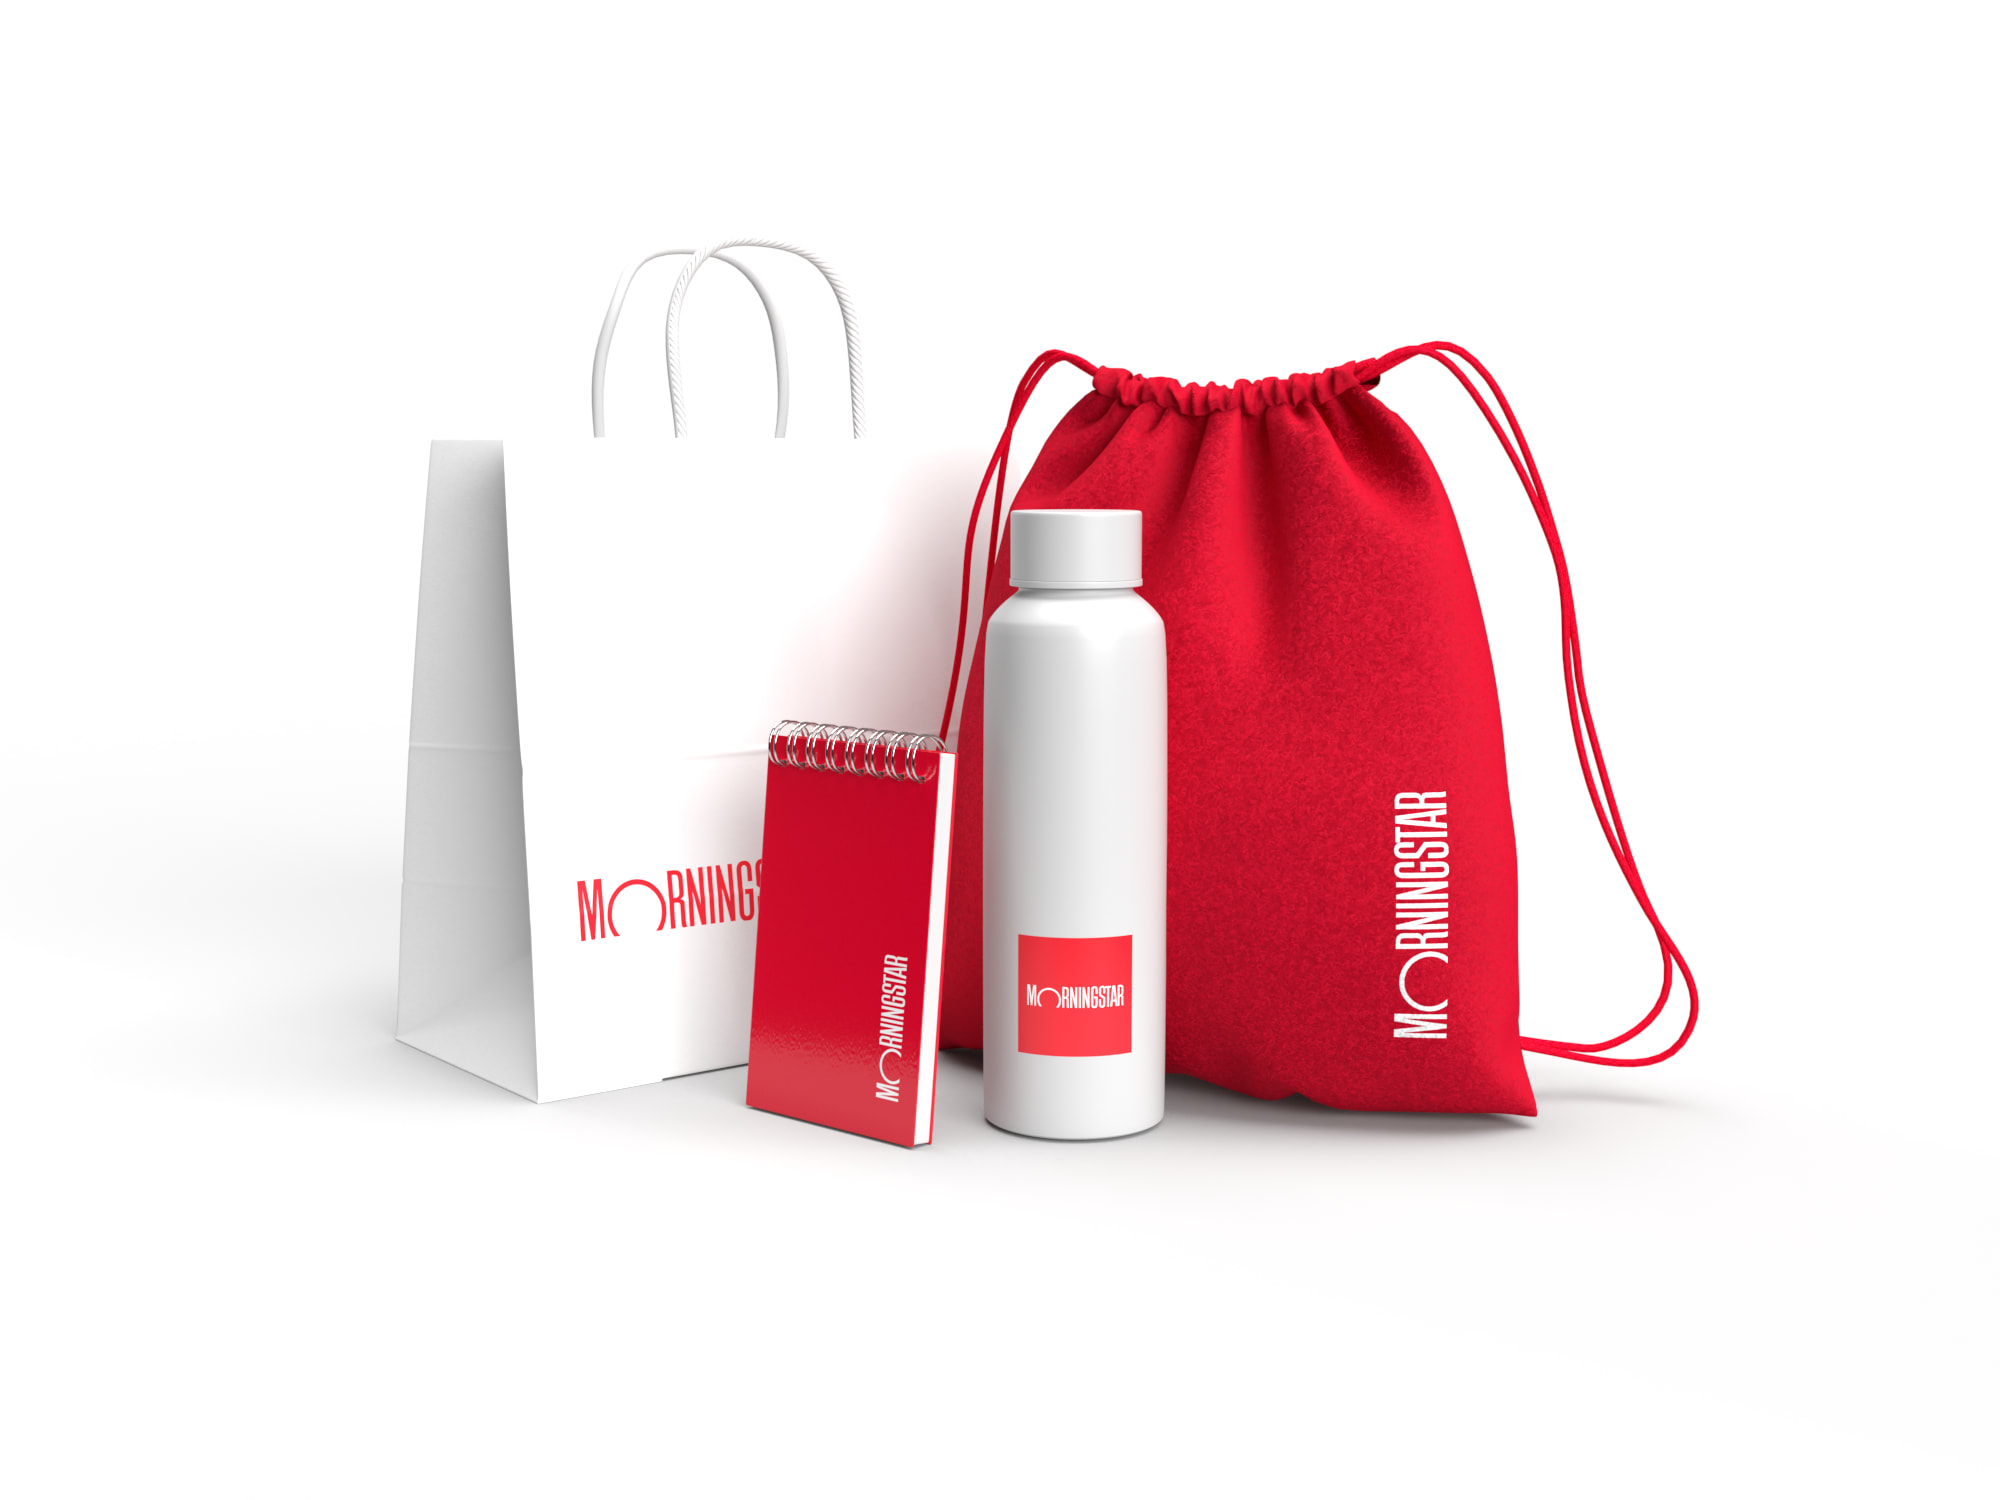 Grouping of branded merchandise with the Morningstar logo.